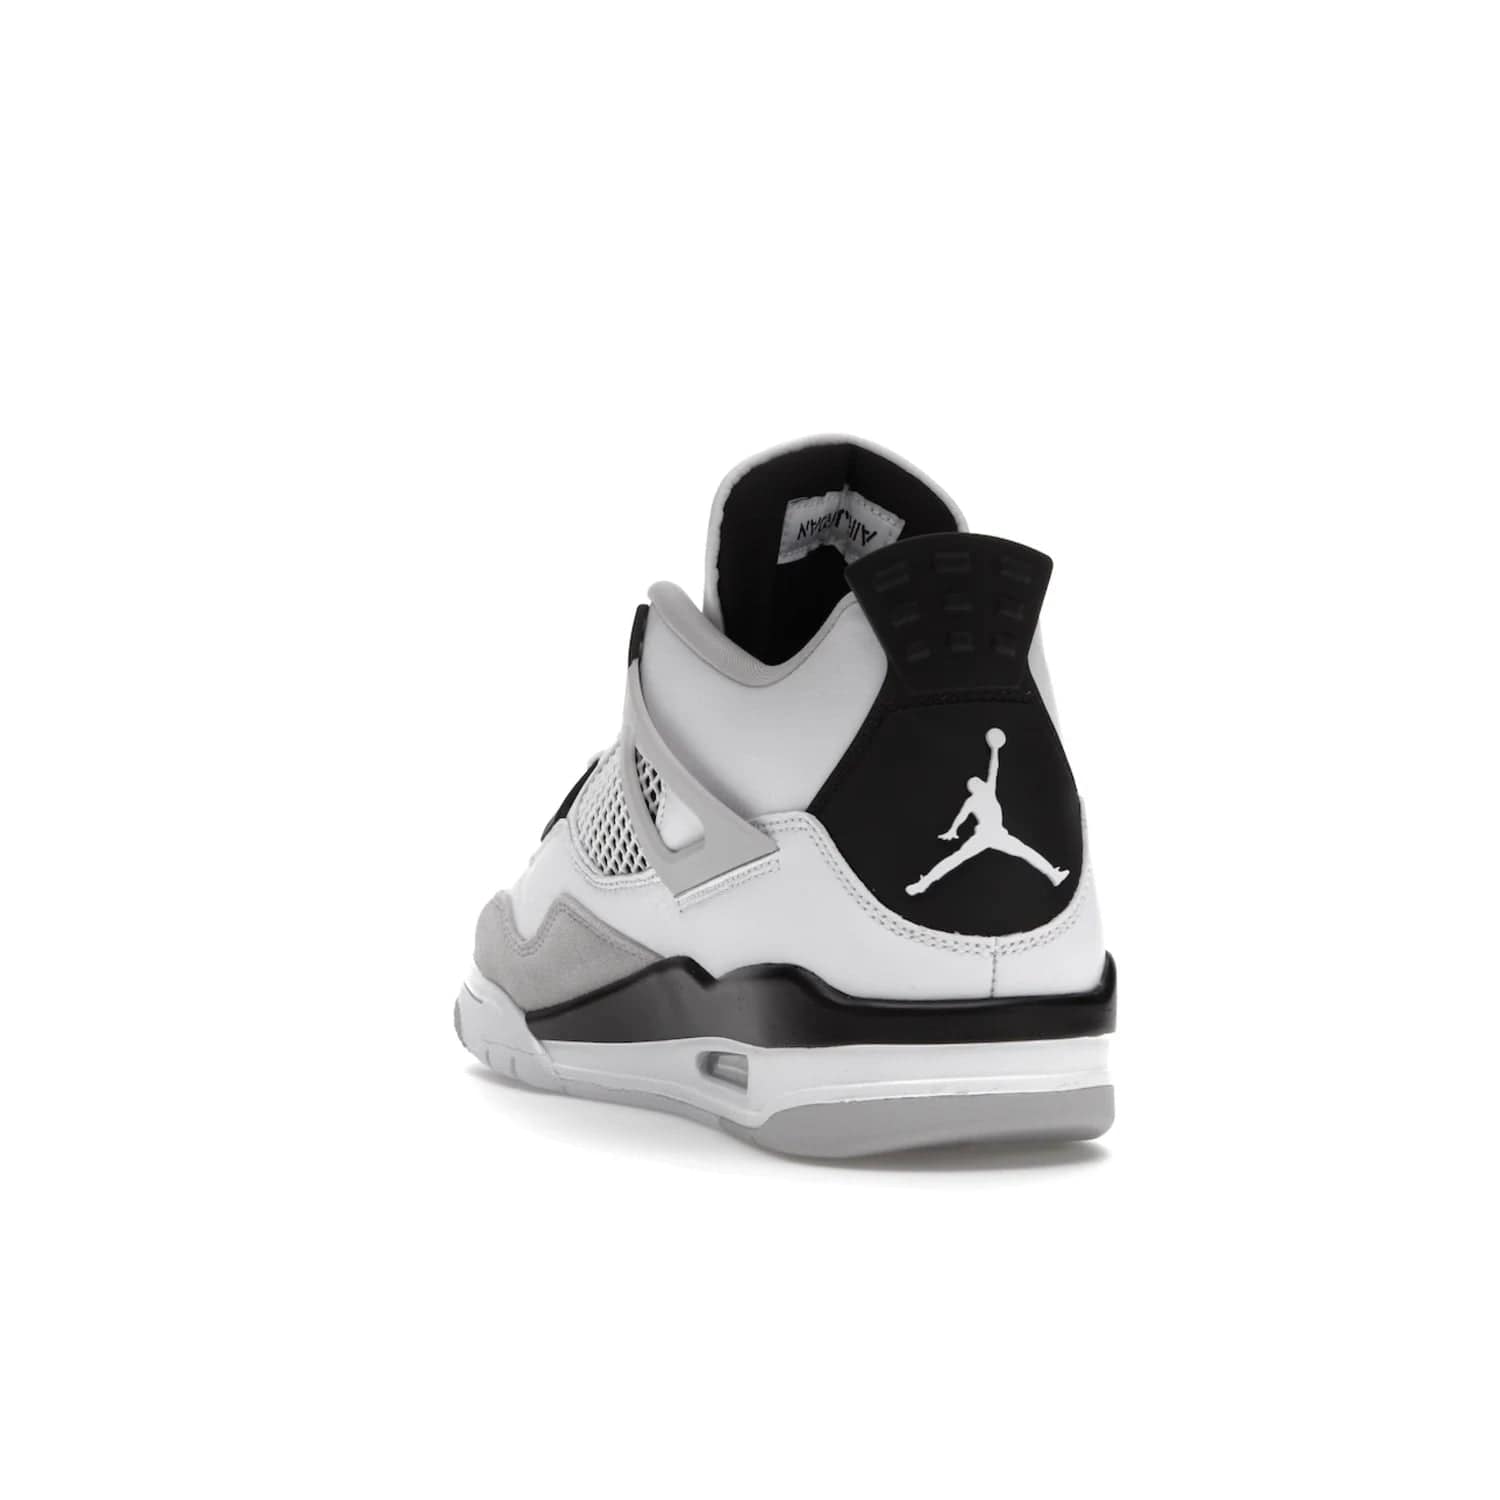 Jordan 4 Retro Military Black - Image 26 - Only at www.BallersClubKickz.com - Updated Air Jordan 4 style with a white/black/light grey sole and visible Air unit. Released in May 2022, offering timeless classic style and comfort.